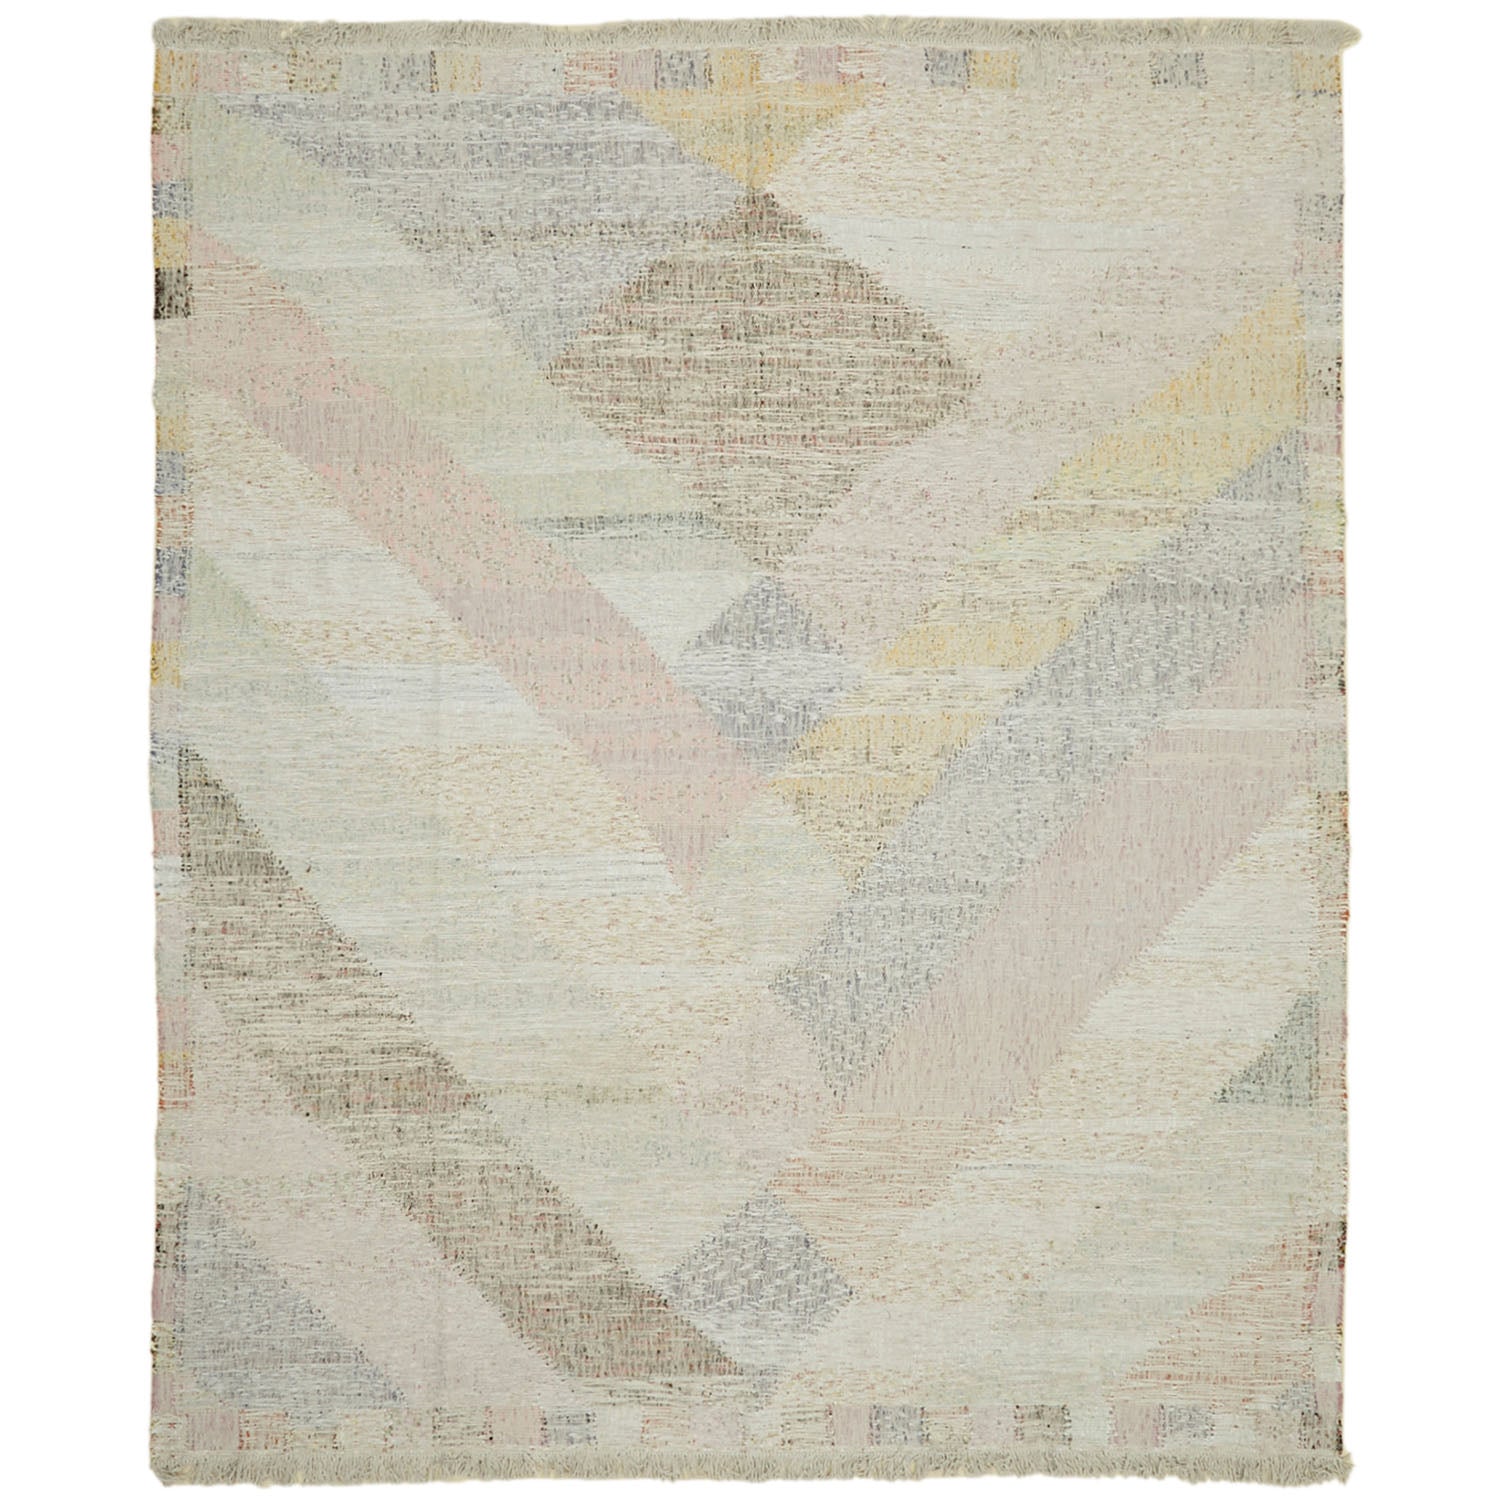 Contemporary handwoven textile featuring abstract geometric pattern in muted tones.